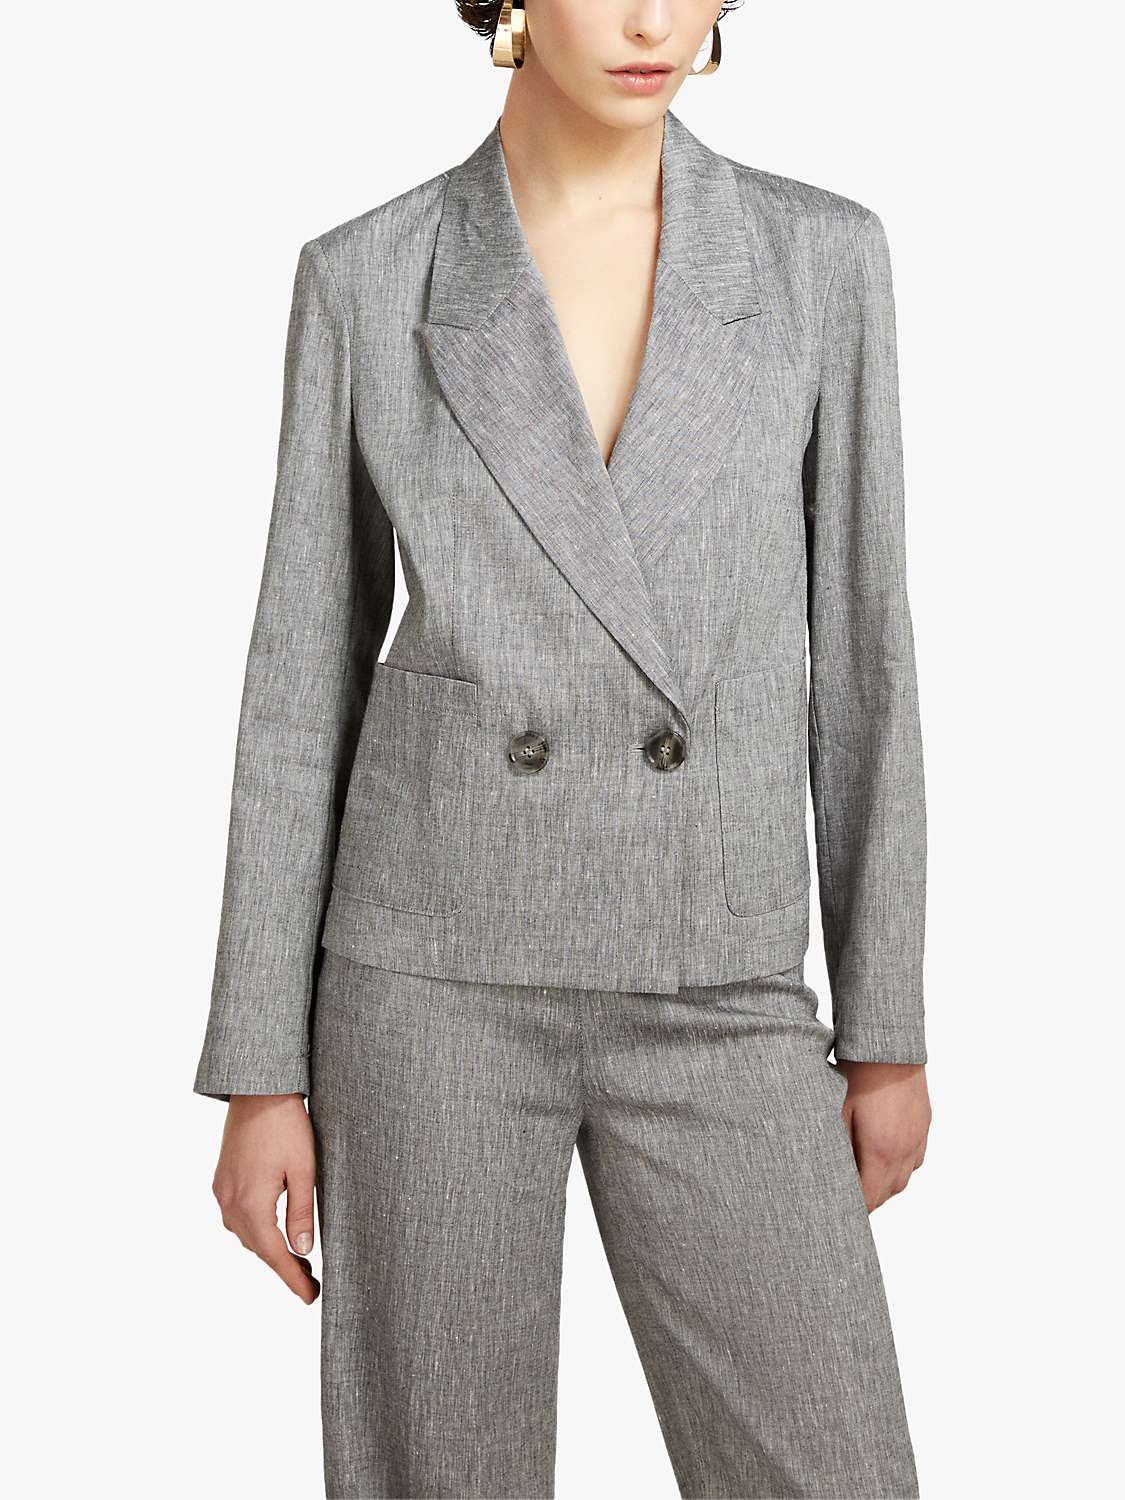 Buy SISLEY Double Breasted Boxy Blazer, Grey Online at johnlewis.com